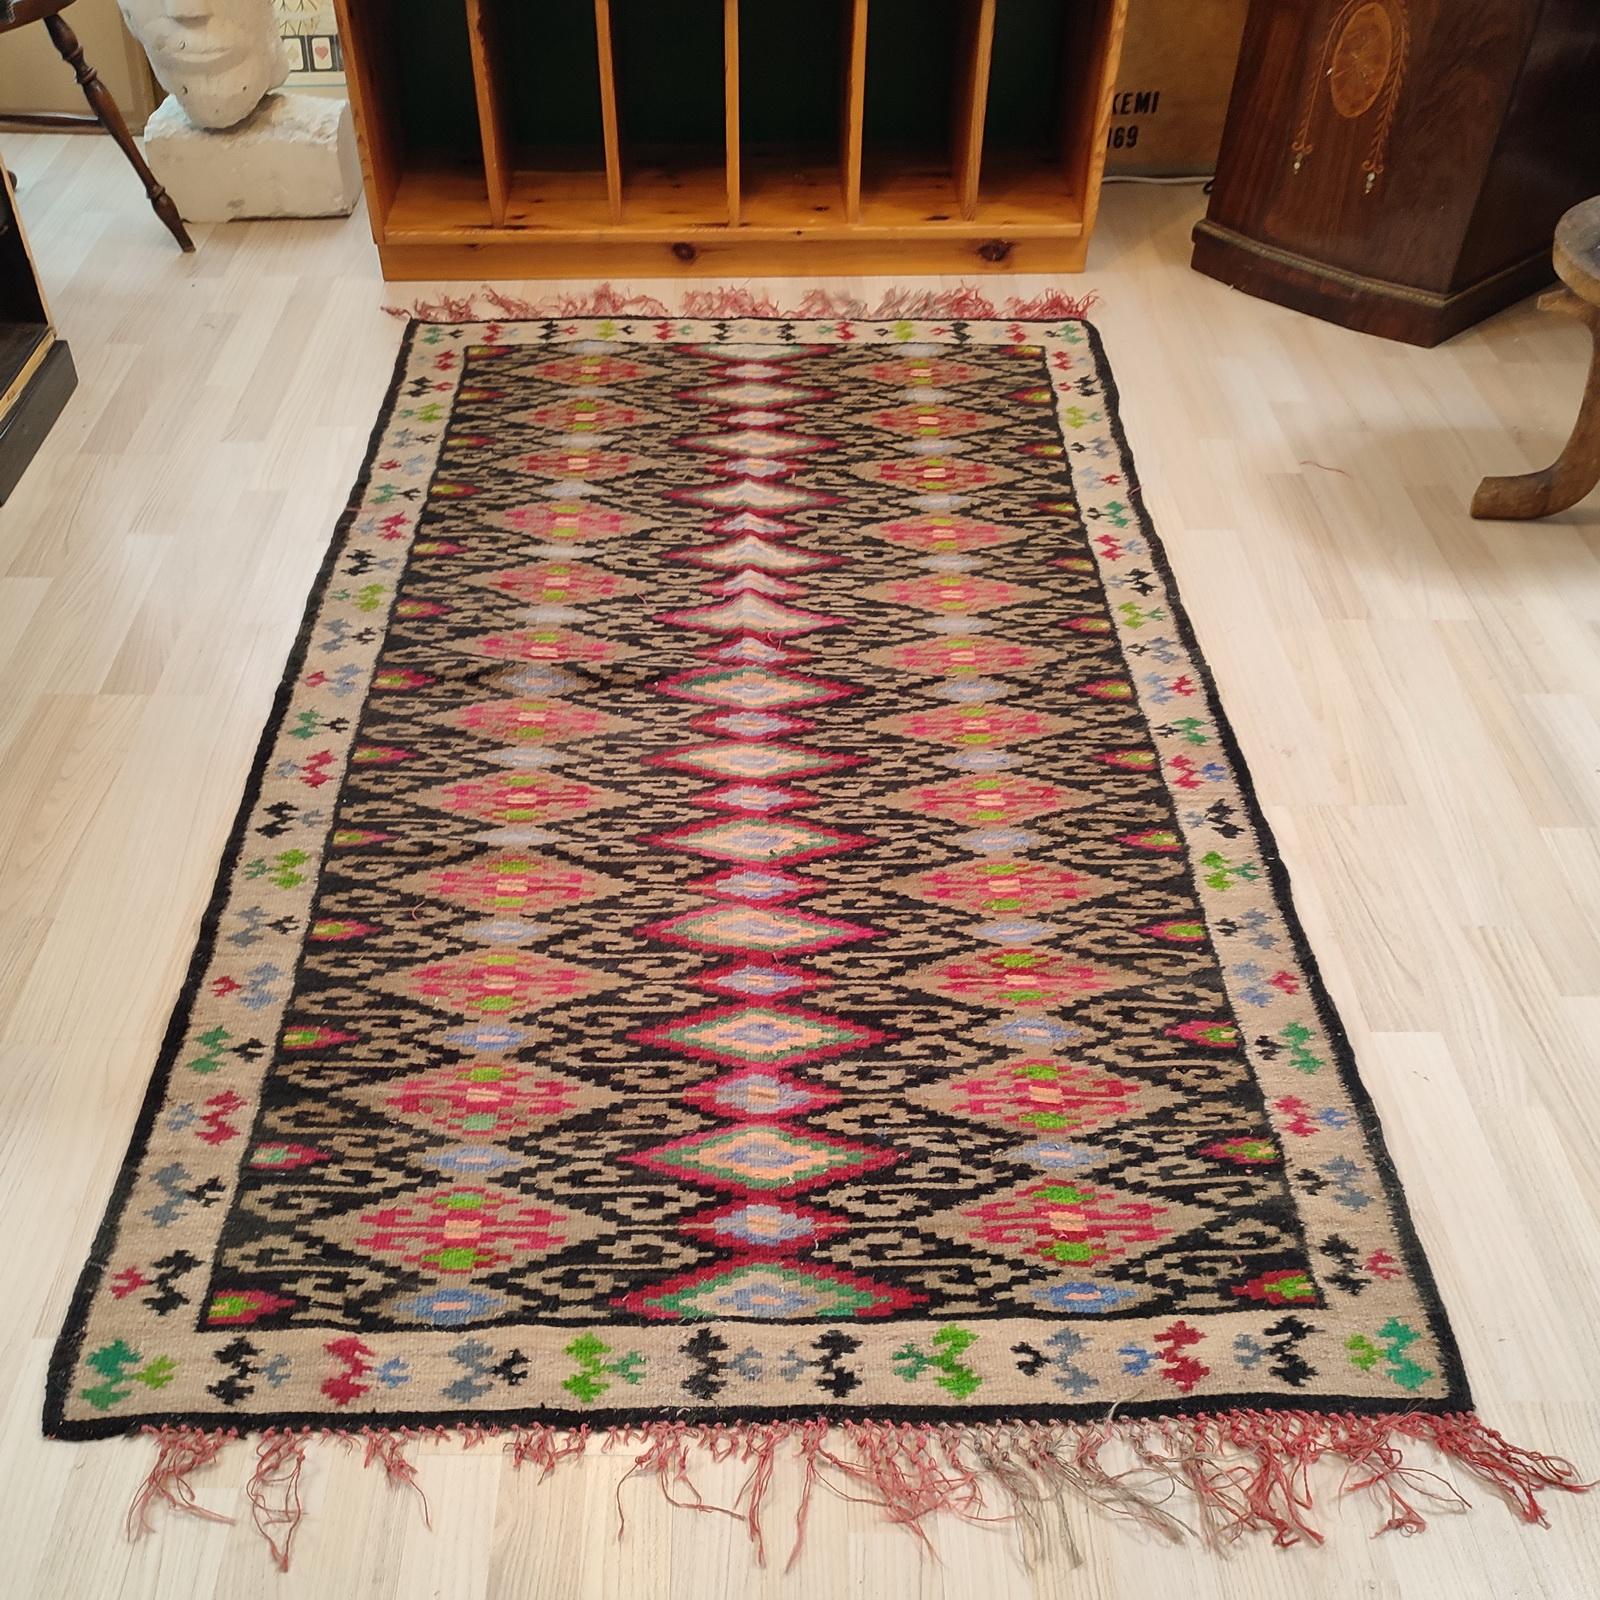 Turkish Kilim, of the 1940s.
This colorful antique kilim has a bold presence provided by its graphic geometric motifs realized in shades of vivid green, sky blue, dark red, olive, accents of yellow, all against a black background, with beige border.